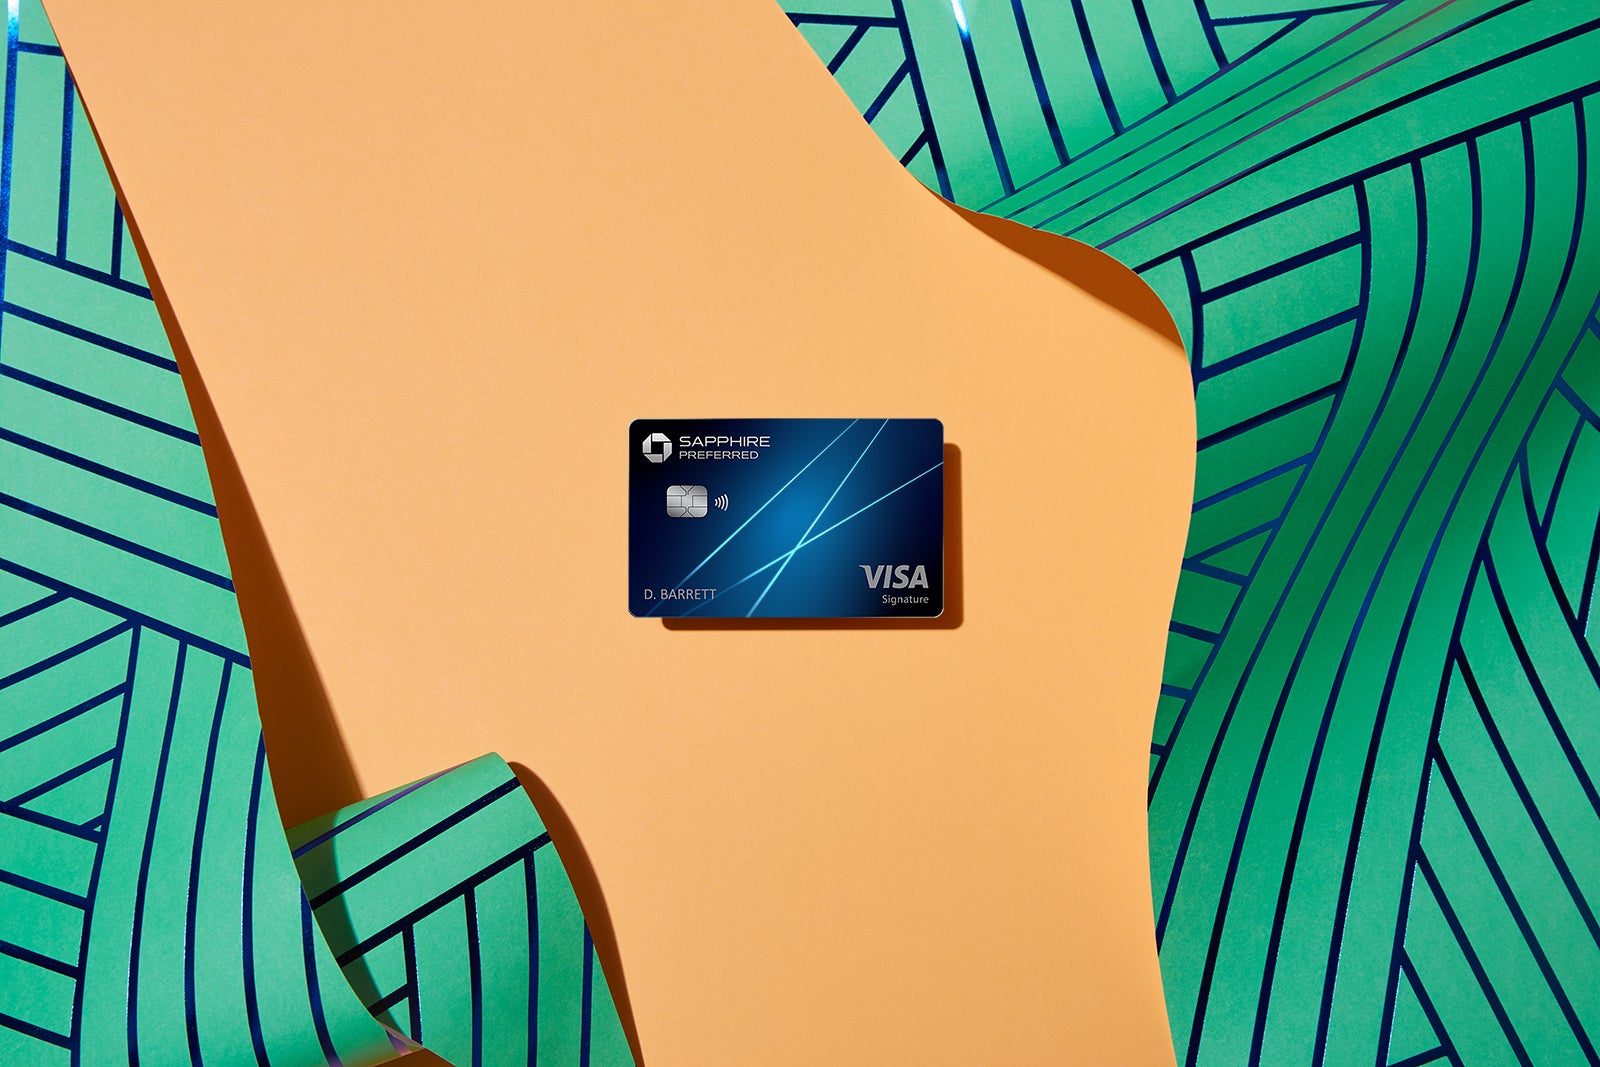 Reasons to apply for a Chase Sapphire Preferred Card